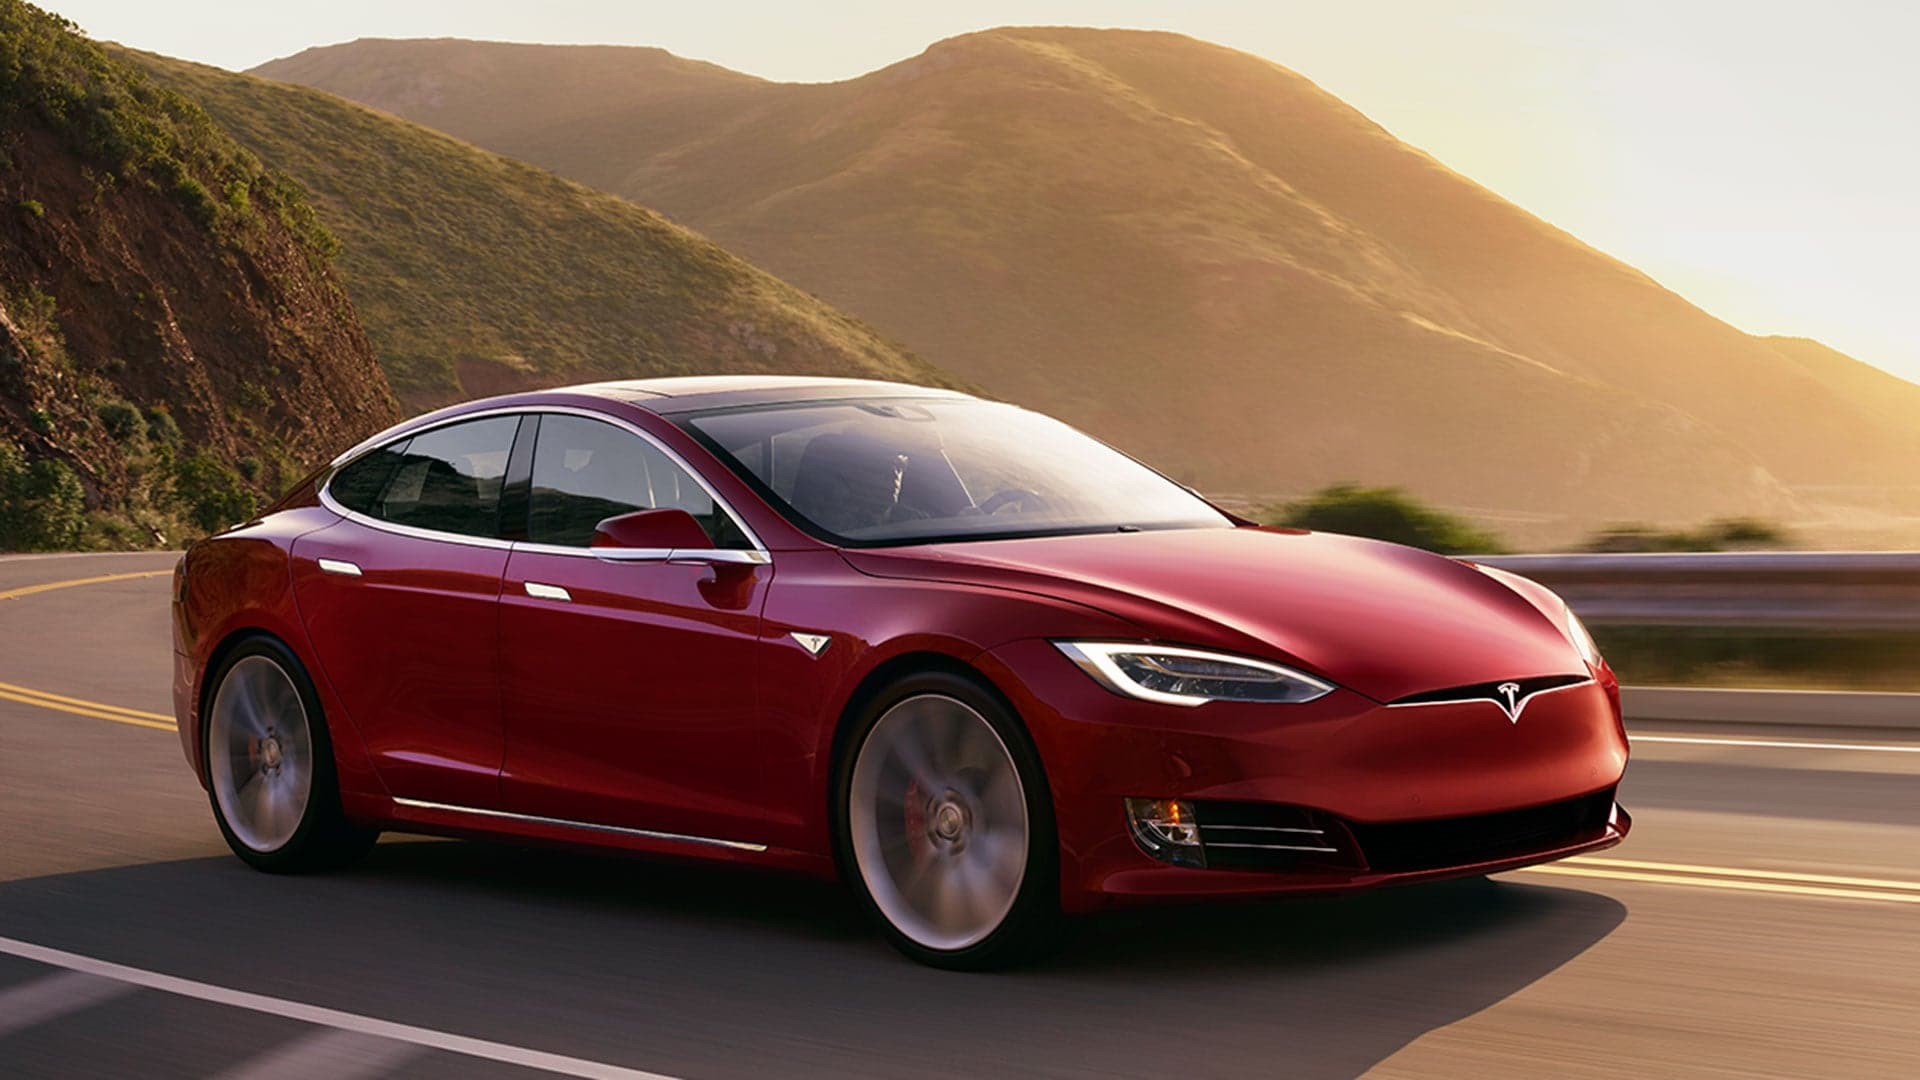 Tesla to Discontinue Cheapest Model S, Increasing Model 3 Price Gap